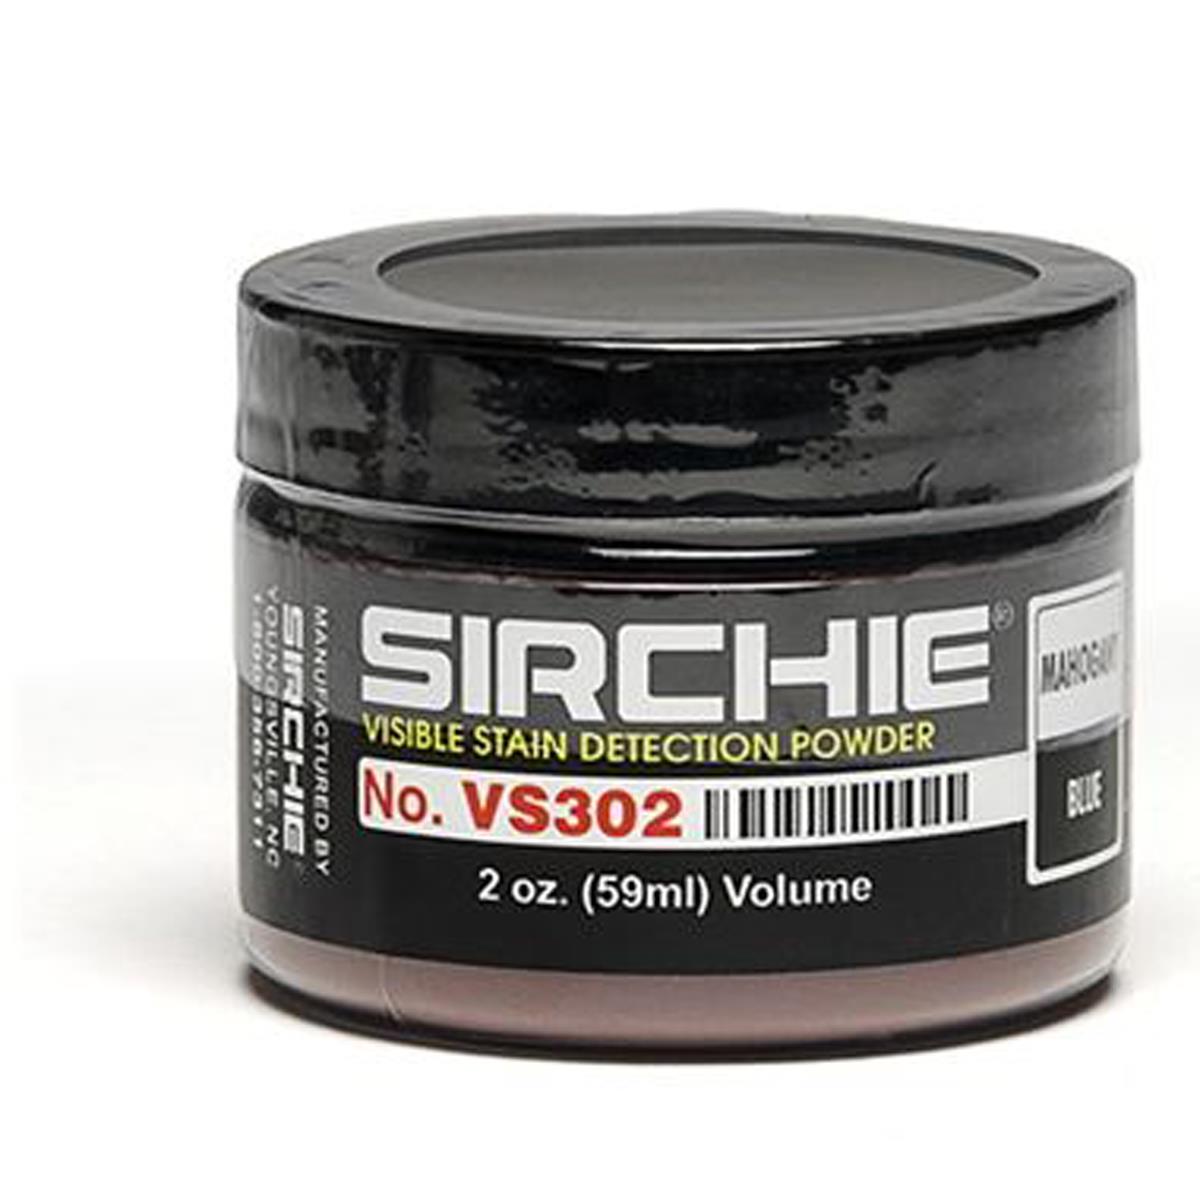 Image of Sirchie Visible Stain Detection Powder